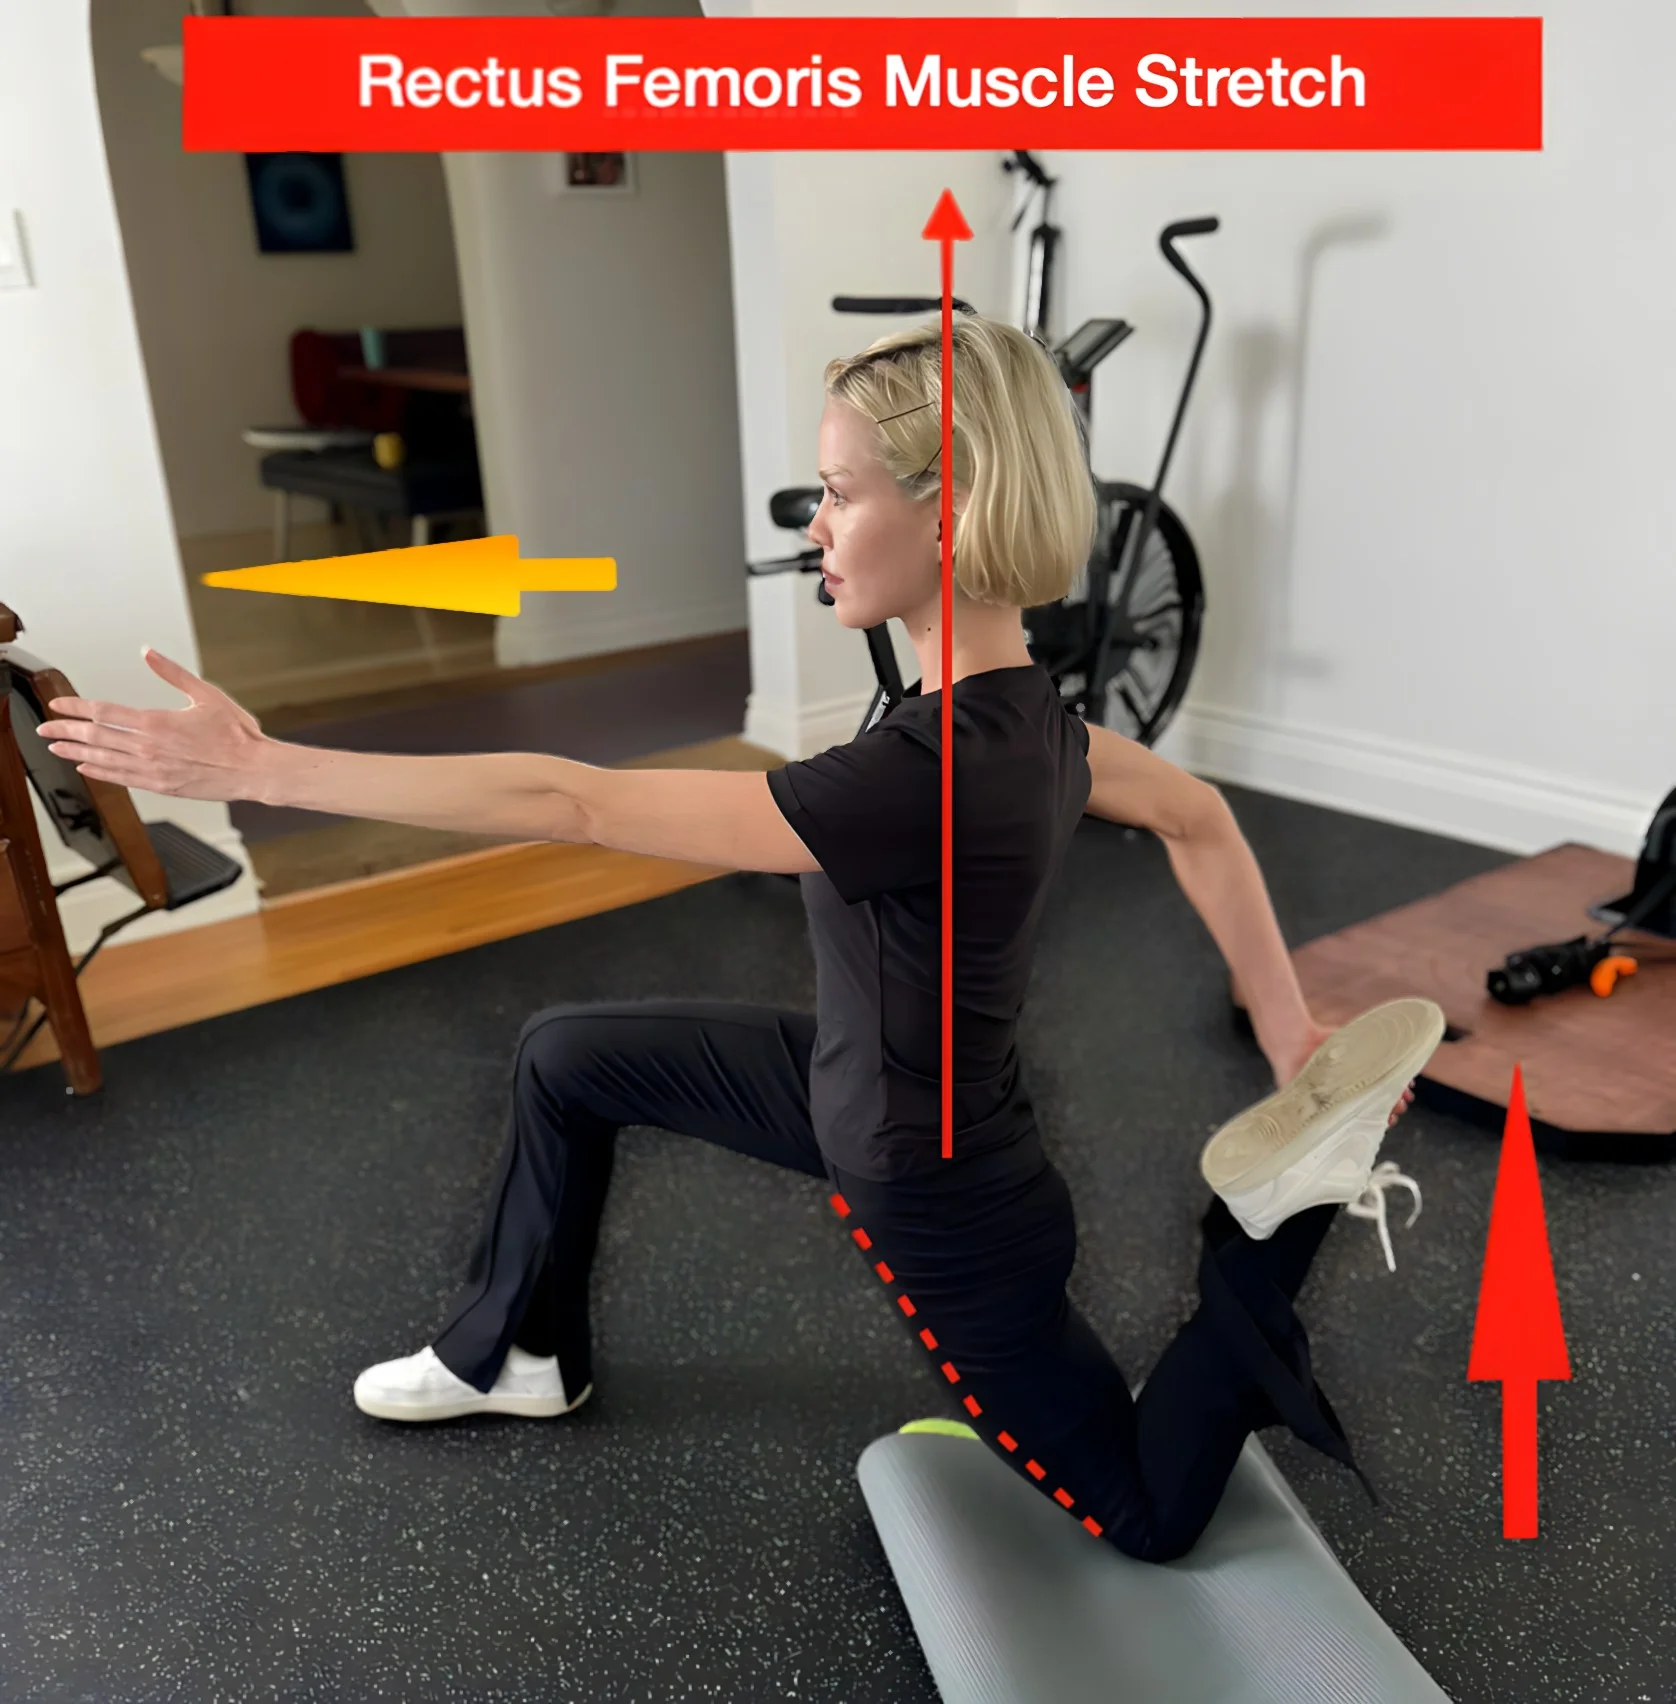 a picture of a women performing a stretch for the rectus femoris muscle